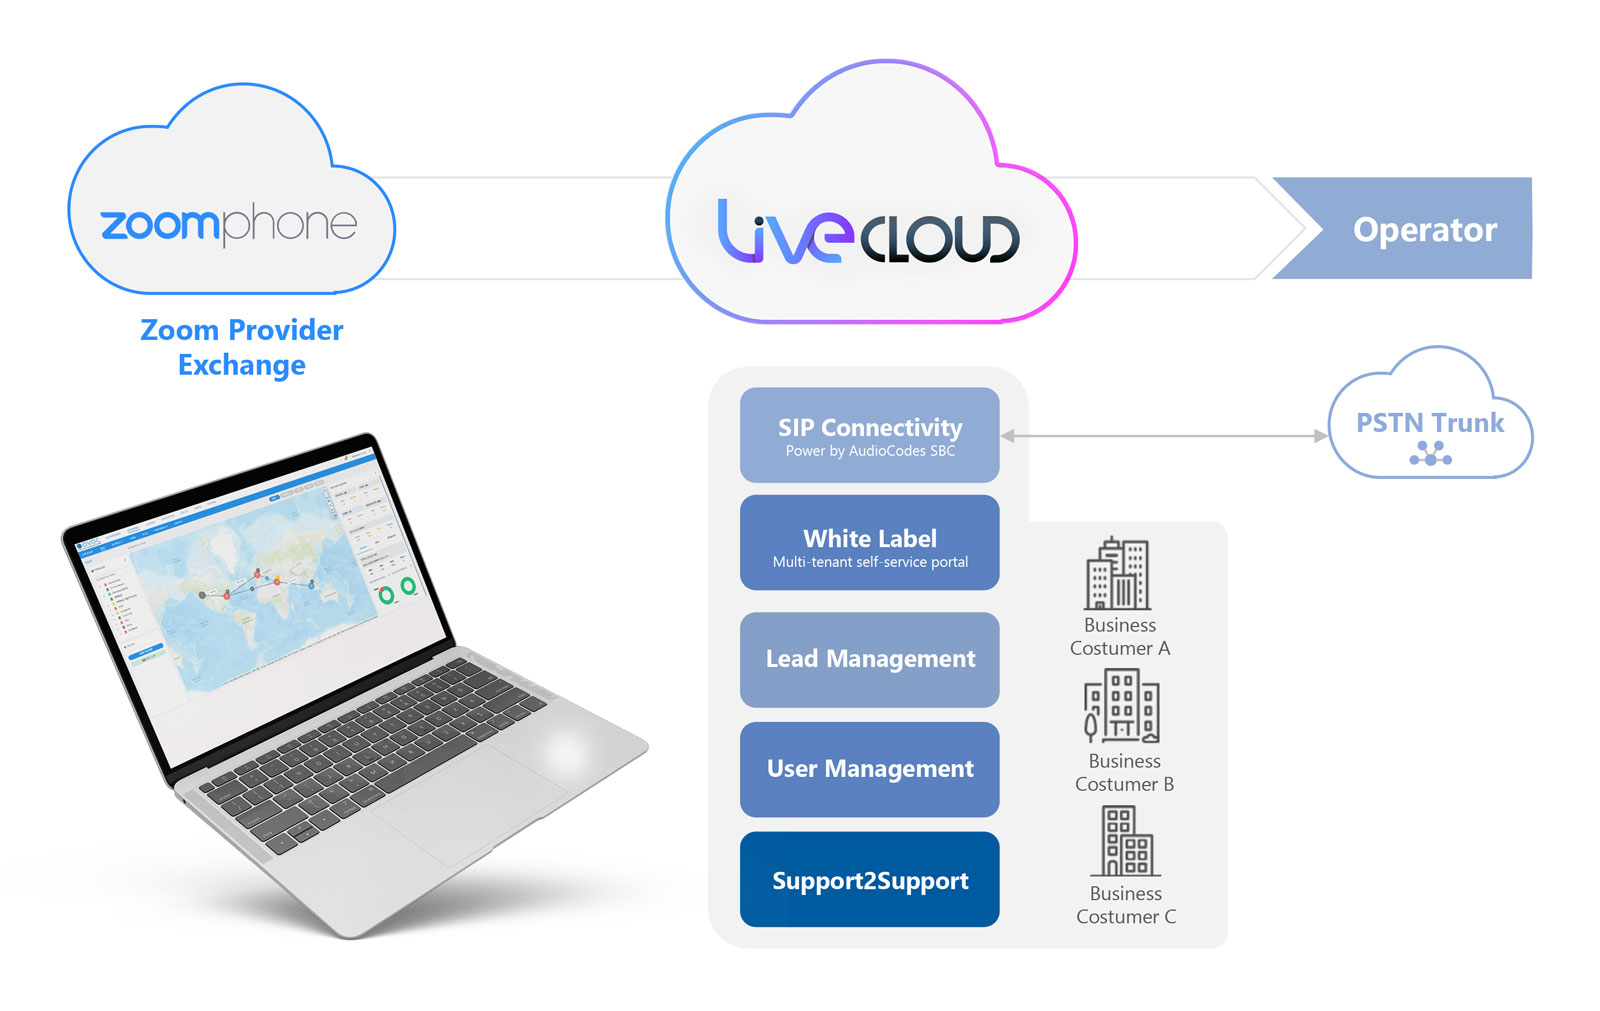 AudioCodes Live Cloud SaaS solution for Zoom Phone Provider Exchange